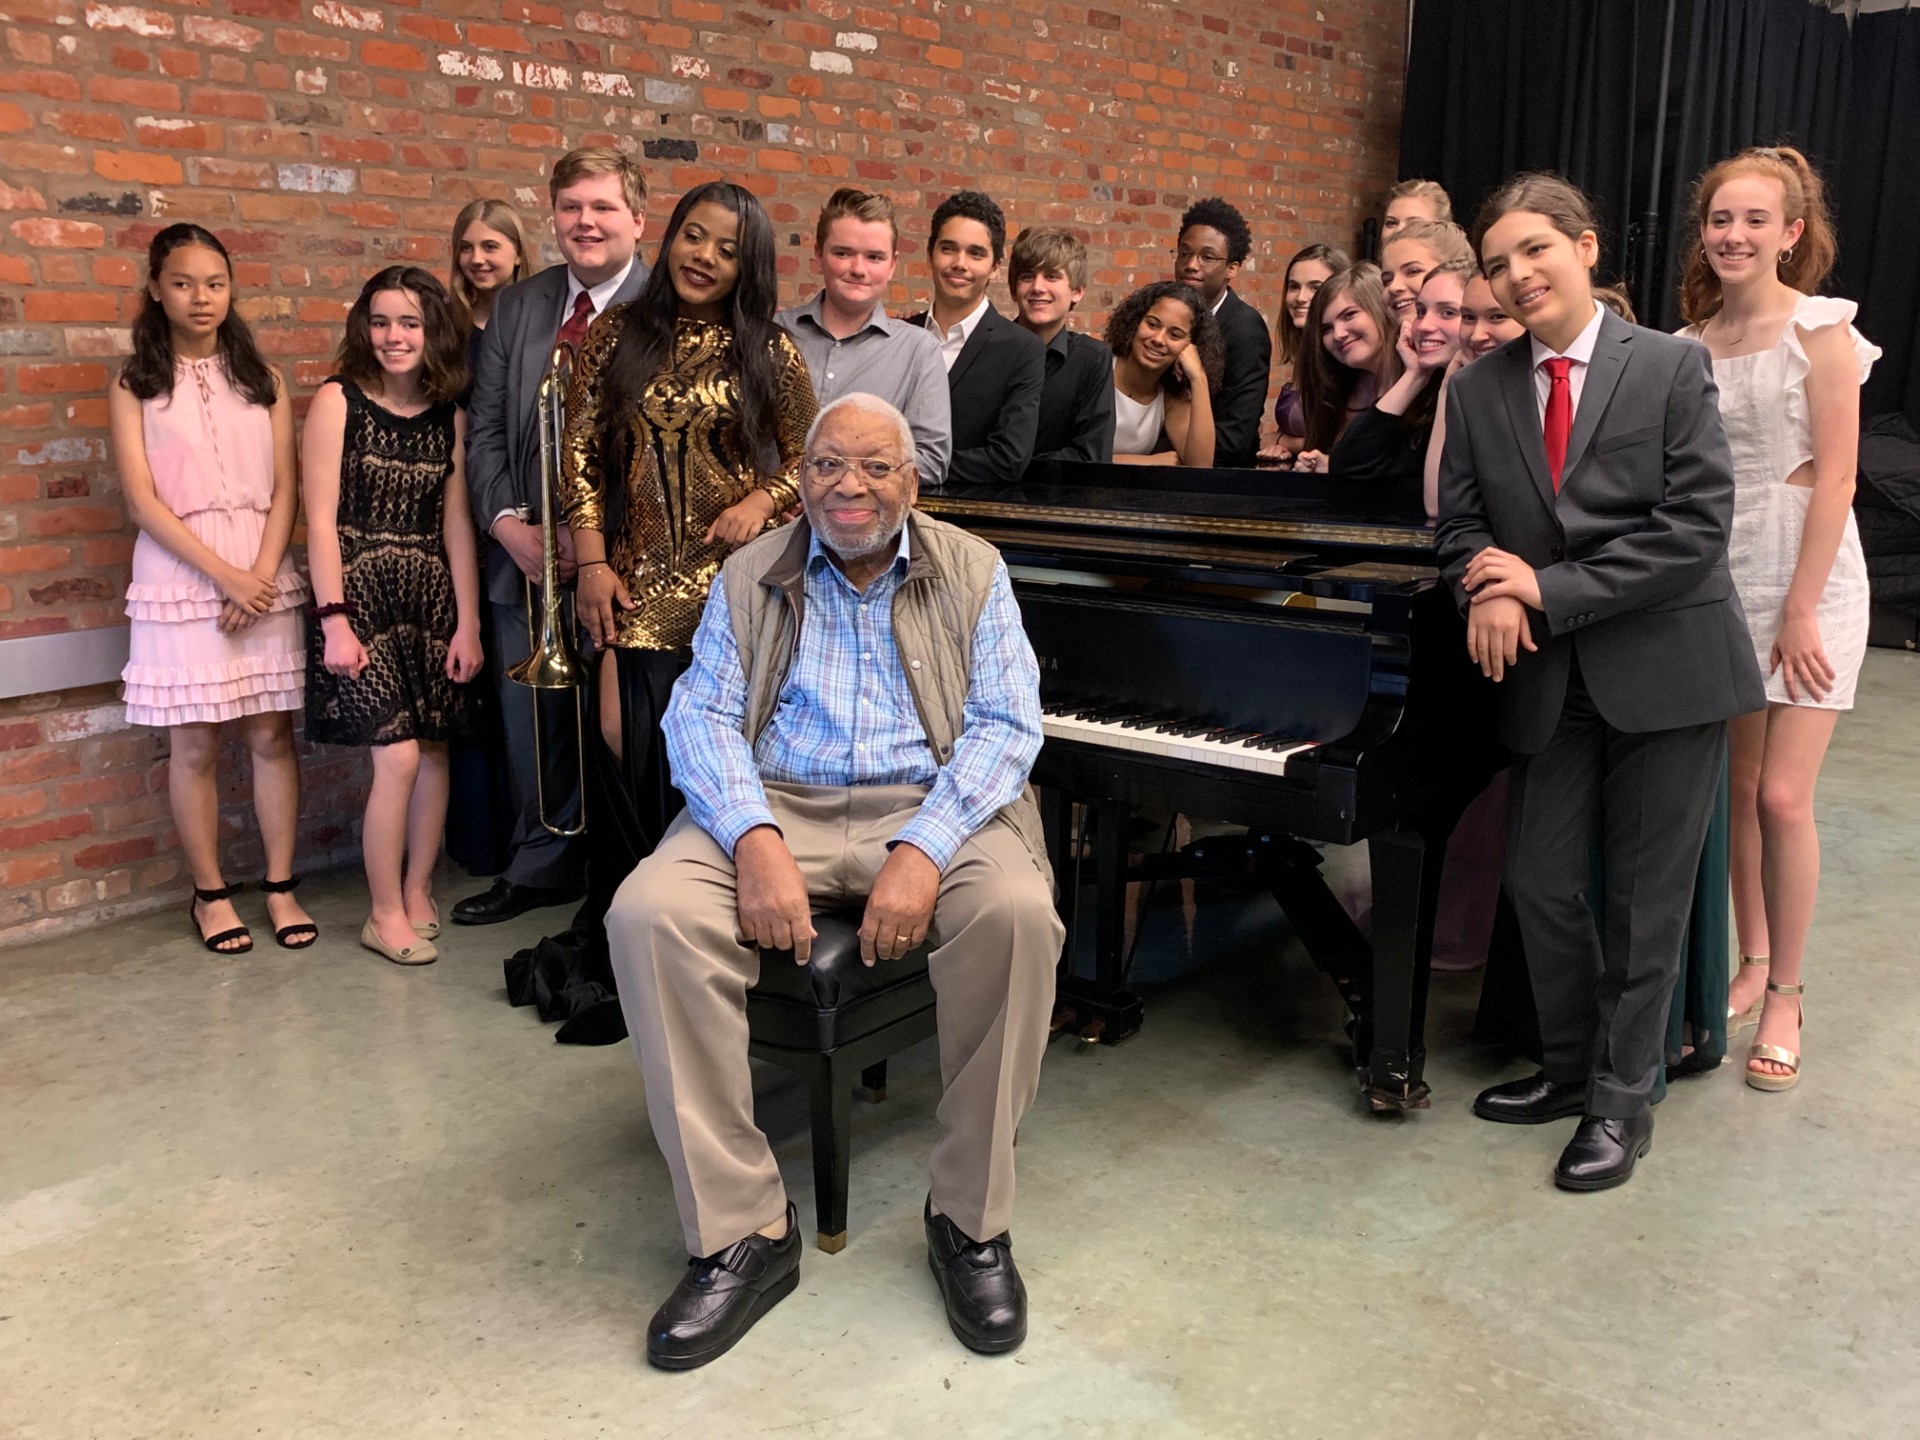 Ellis Marsalis, one of NOCCA’s founding fathers, has died